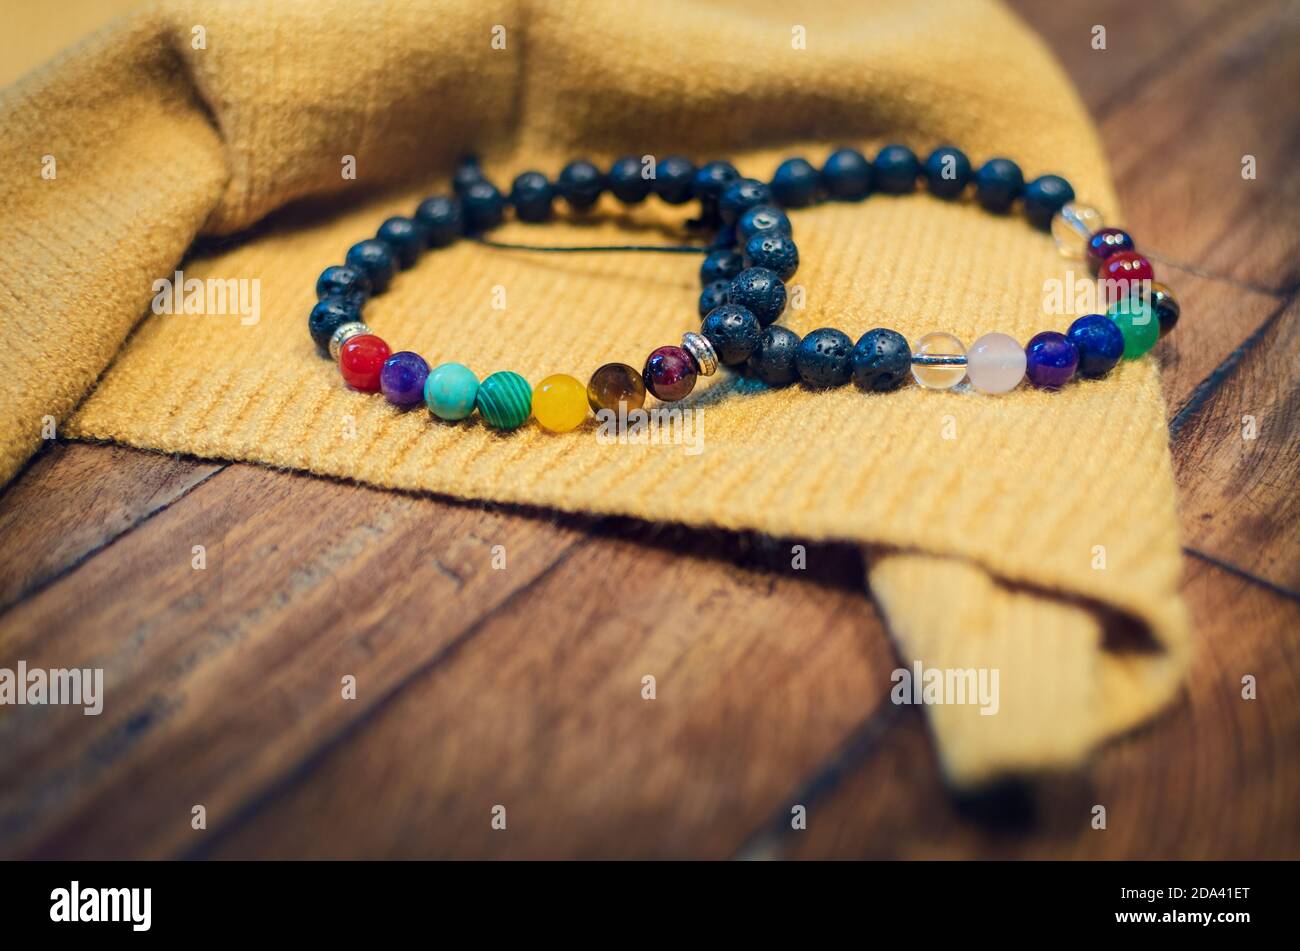 two stone bracelets for healing crystal therapy, with lava stones and different crystals on a wooden table and yellow cloth Stock Photo